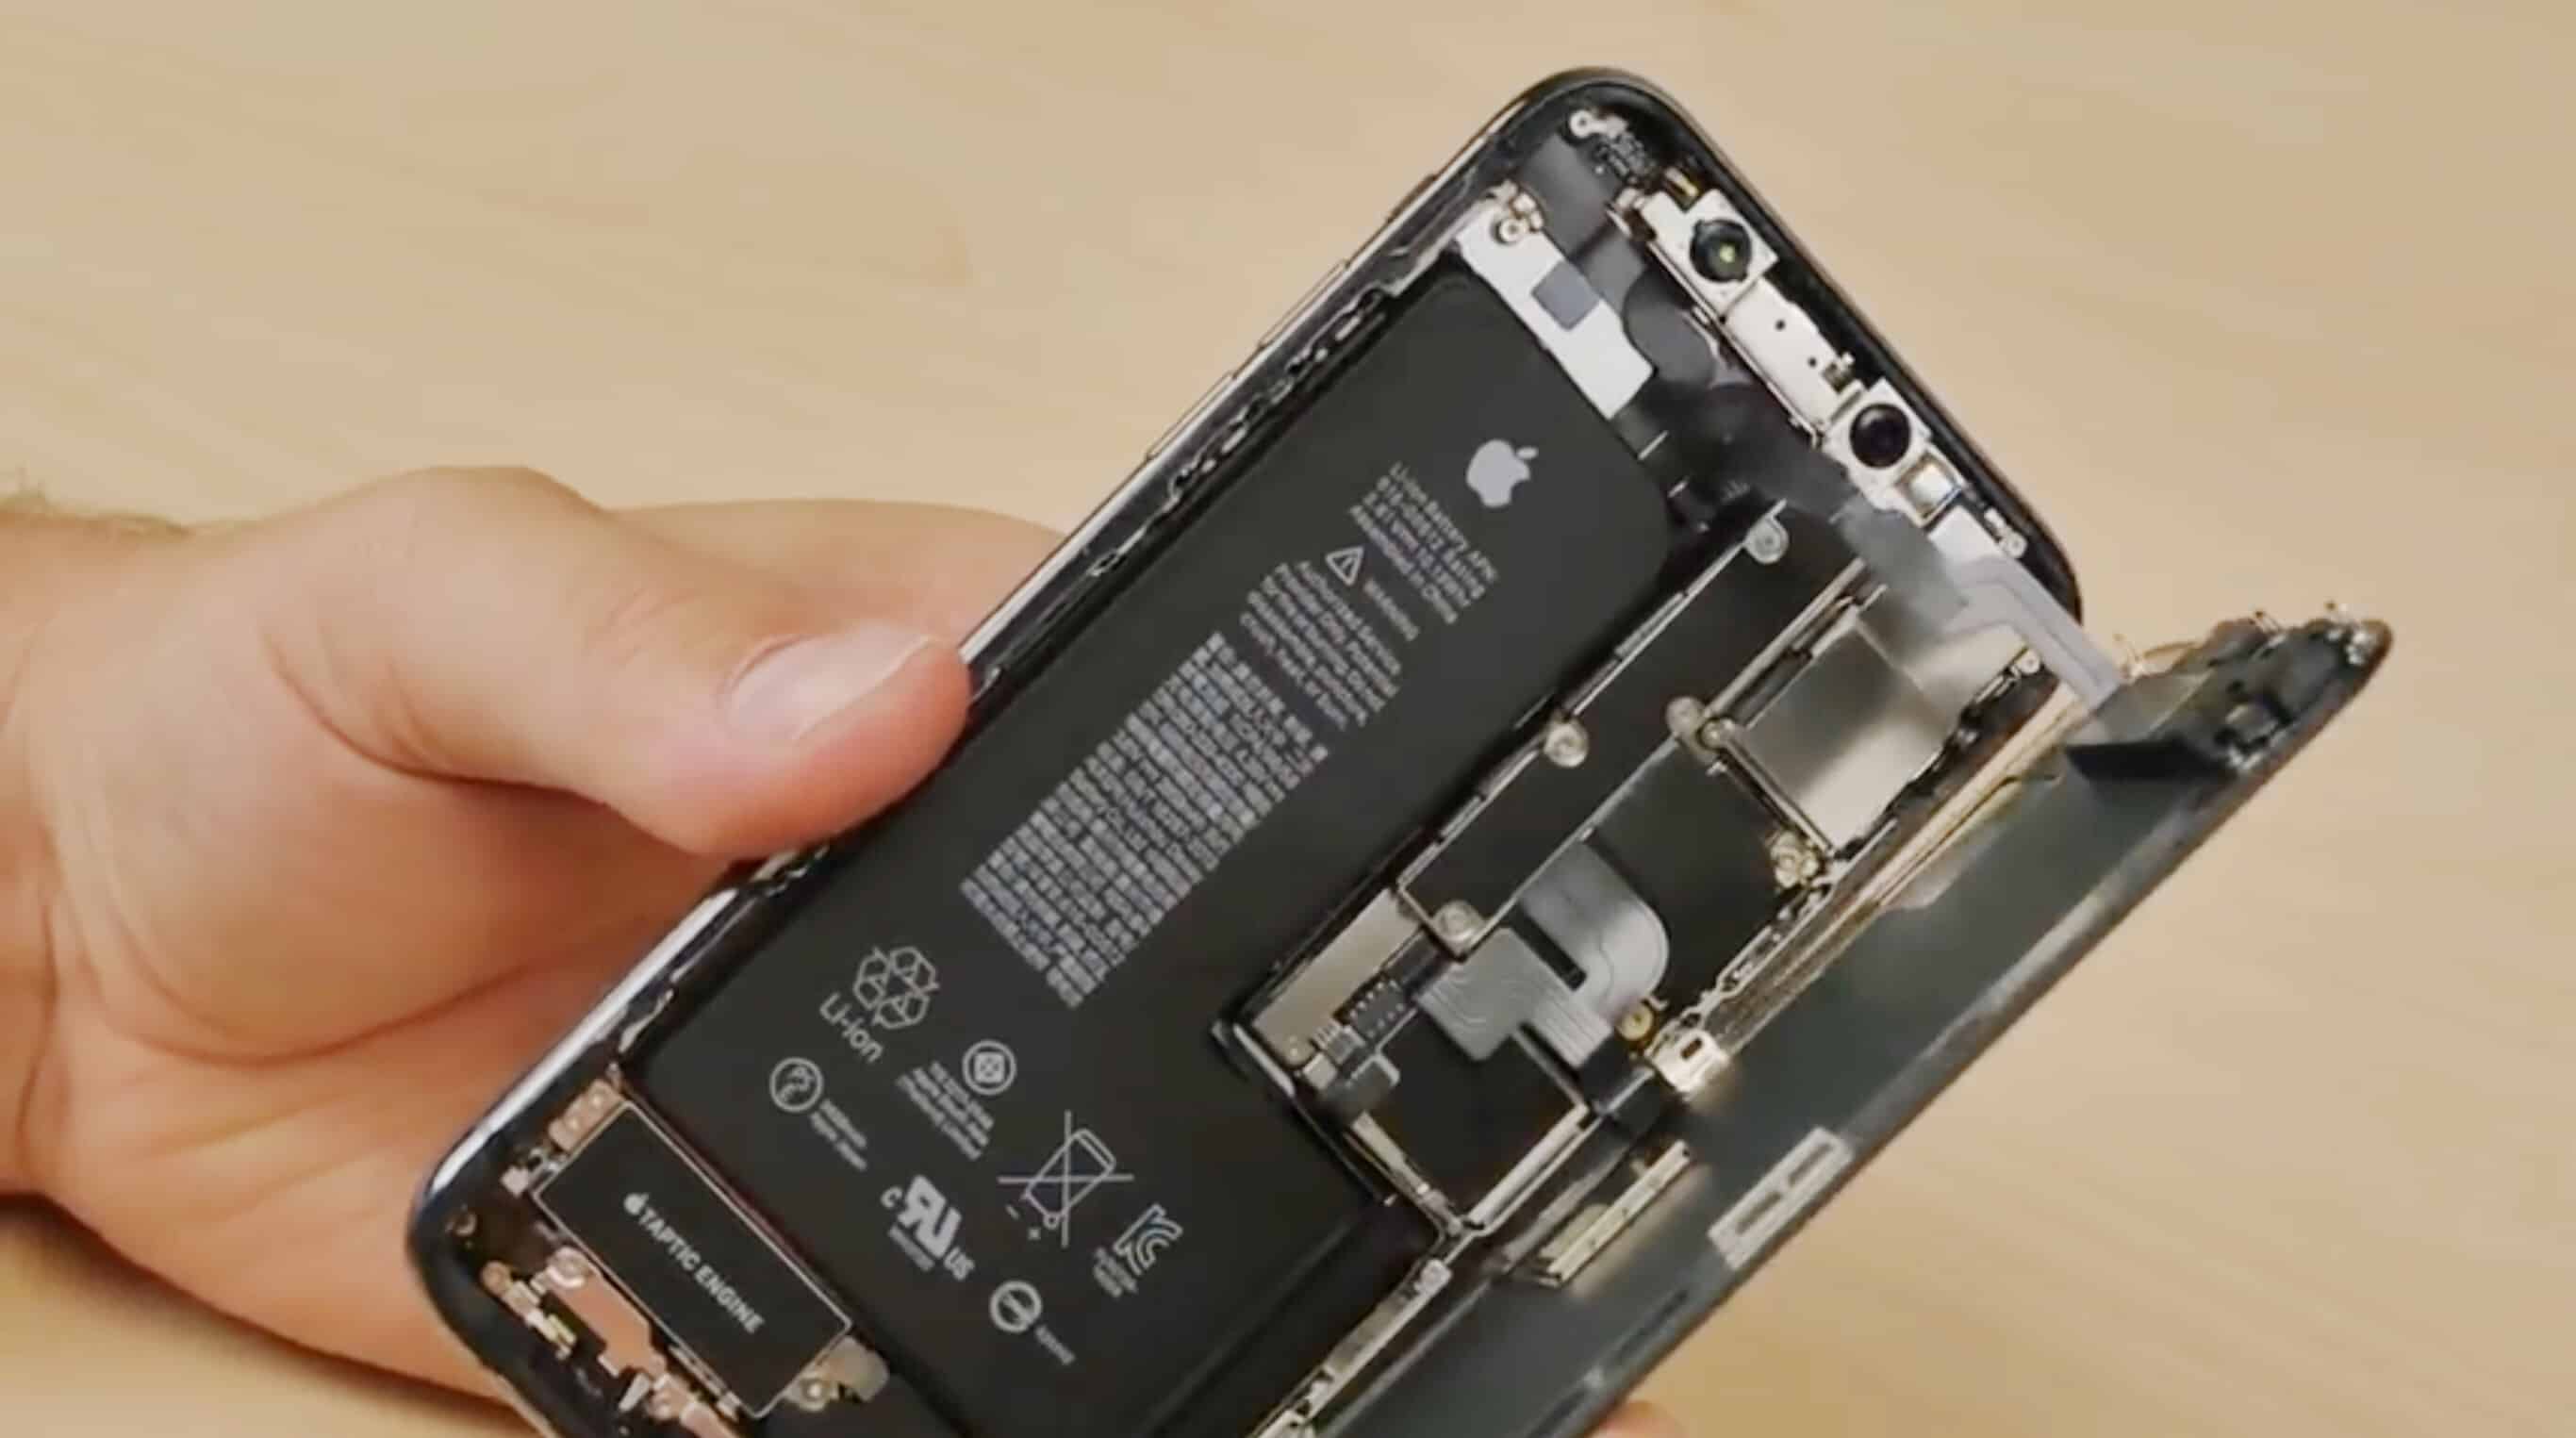 The first iPhone XS teardown video shows the unusual L-shaped battery.